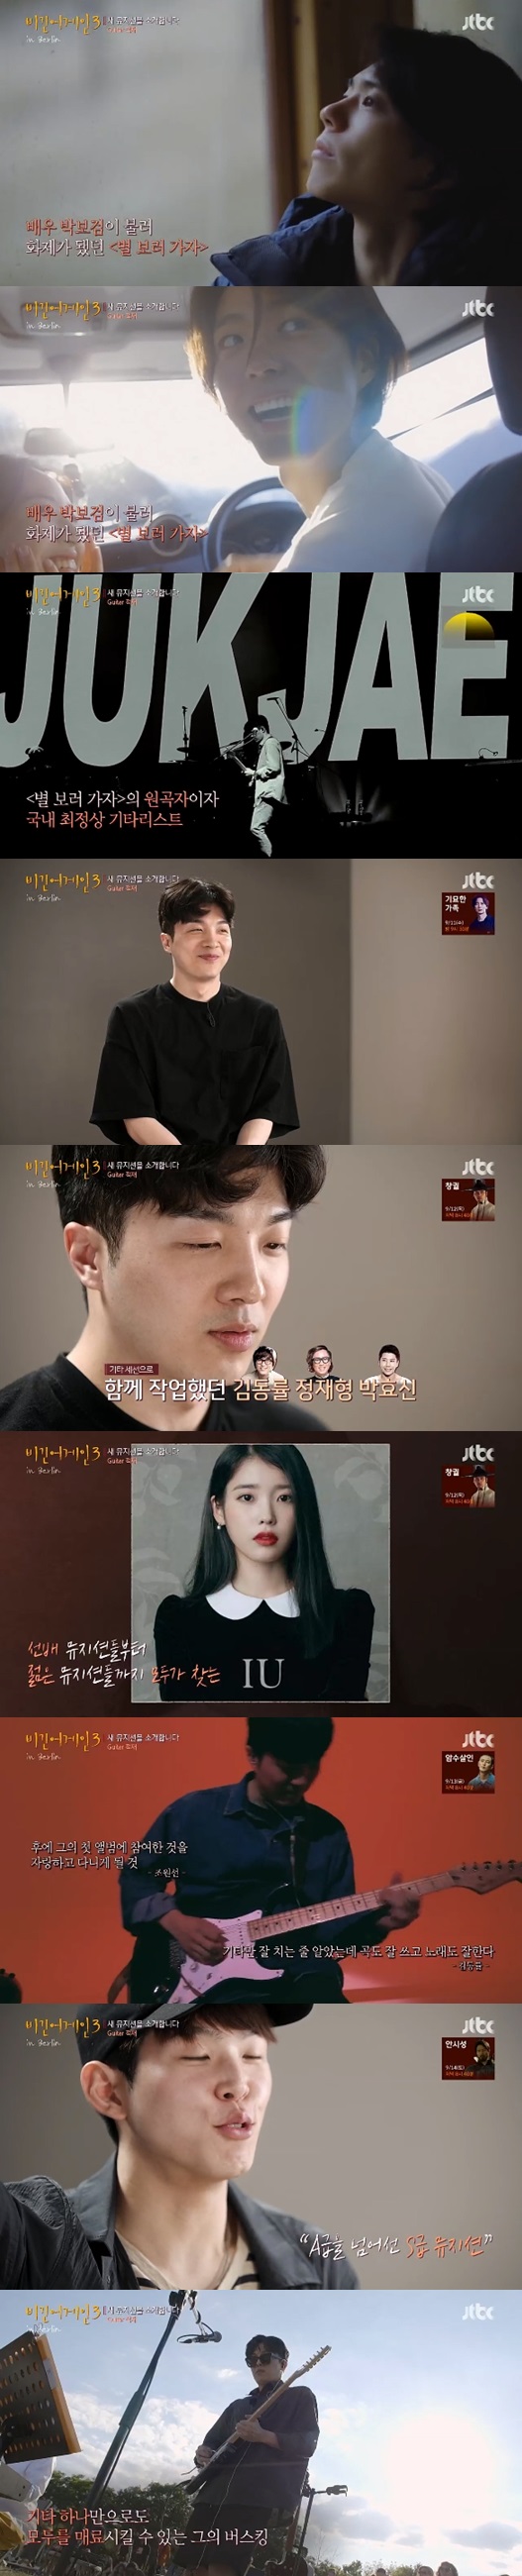 Singer and guitarist Jukjae has expressed his feelings for becoming a Top Model on bus kings.JTBC Begin Again, a comprehensive channel broadcast on the 30th night, depicted Girls Generation Taeyeon, Dick Feng Kim Hyun-woo, guitarist Jukjae, Singer transfer and Paul Kim who joined the latecomers.Jukjae, known as the original song of Lets go to the Stars, which was called by Actor Park Bo-gum, is also the top guitarist in Korea.In an interview with the production team, he said, I worked with Kim Dong-ryul, Jung Jae-hyung and Park Hyo-shin. I am working with IU, Taeyeon and Sam Kim these days.Paul Kim said, Its always a guitarist, its a class S guitarist and arranger. Jukjae said, Ive never busked before.It is a personal Top Model that has to break out of what I have not done. 